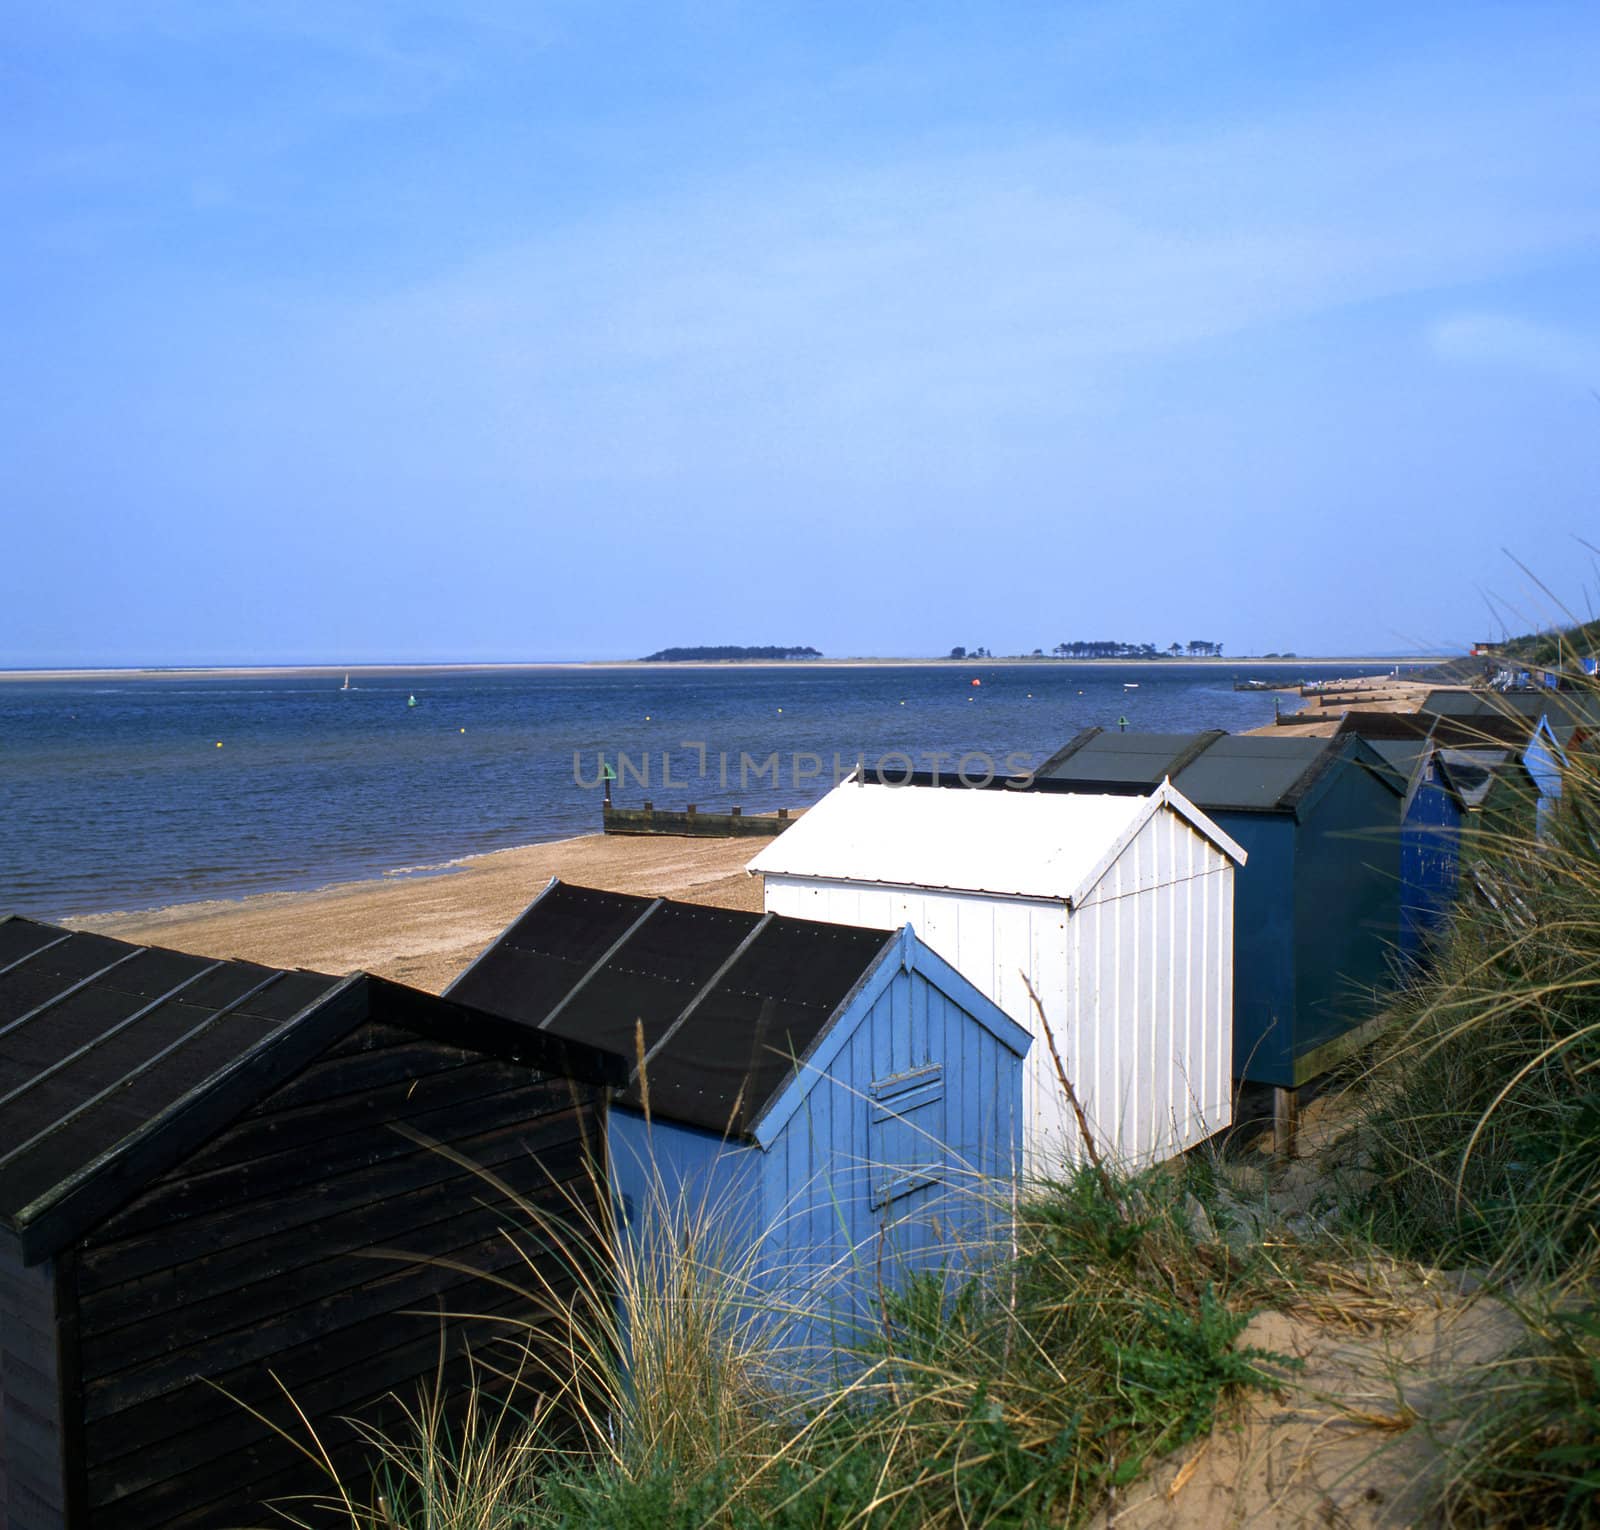 Several beach huts by the sea